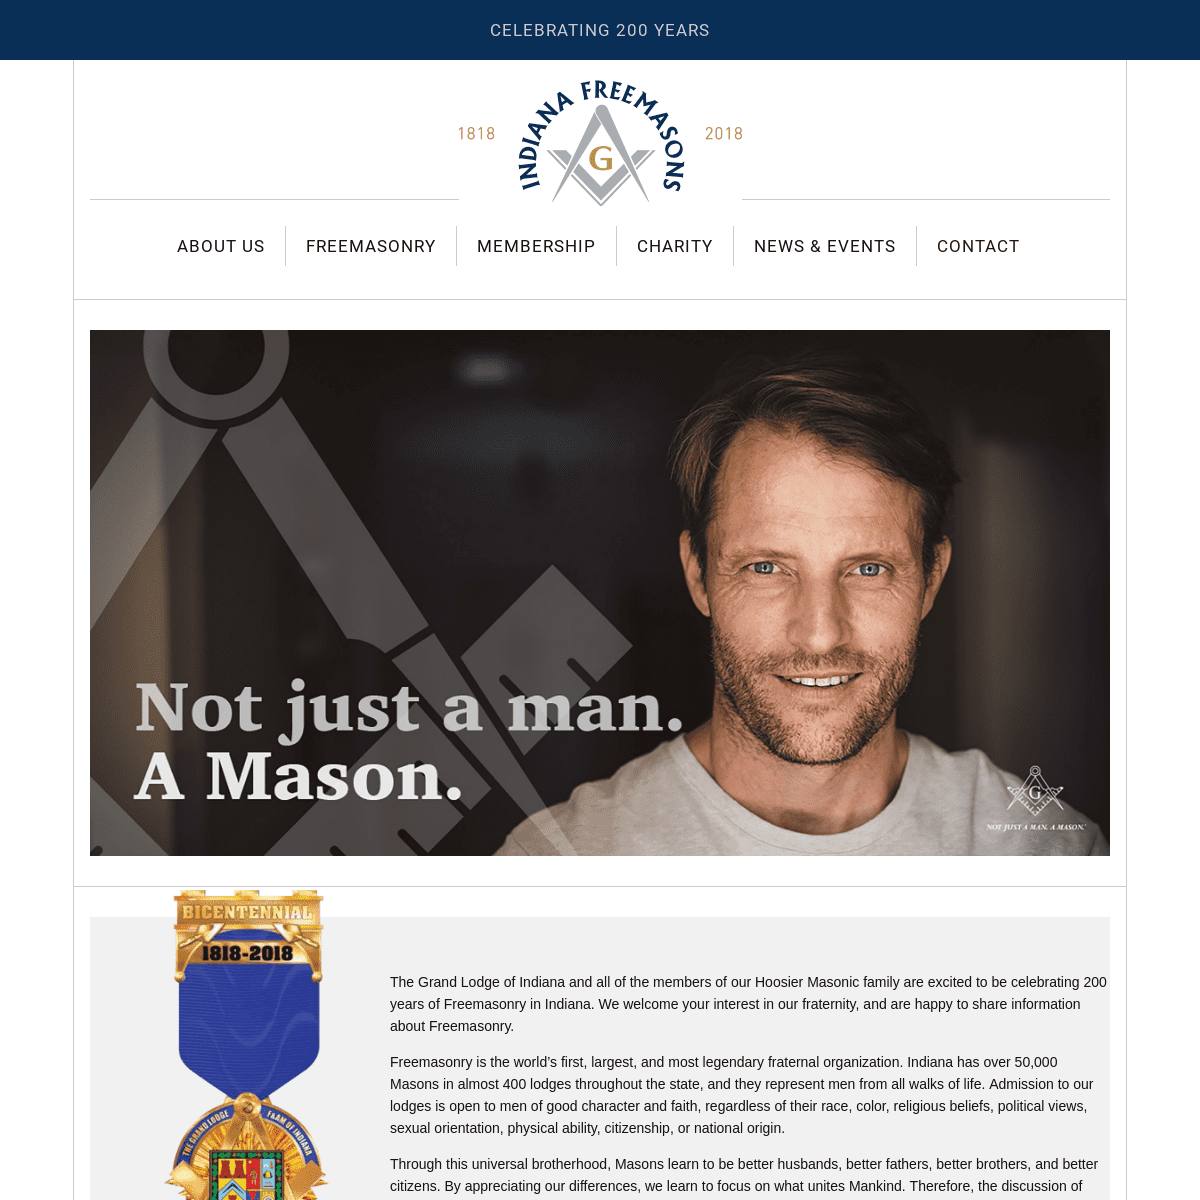 The Grand Lodge of Indiana | Freemasonry remains a charitable and educational society dedicated to morality, mutual aid, charity